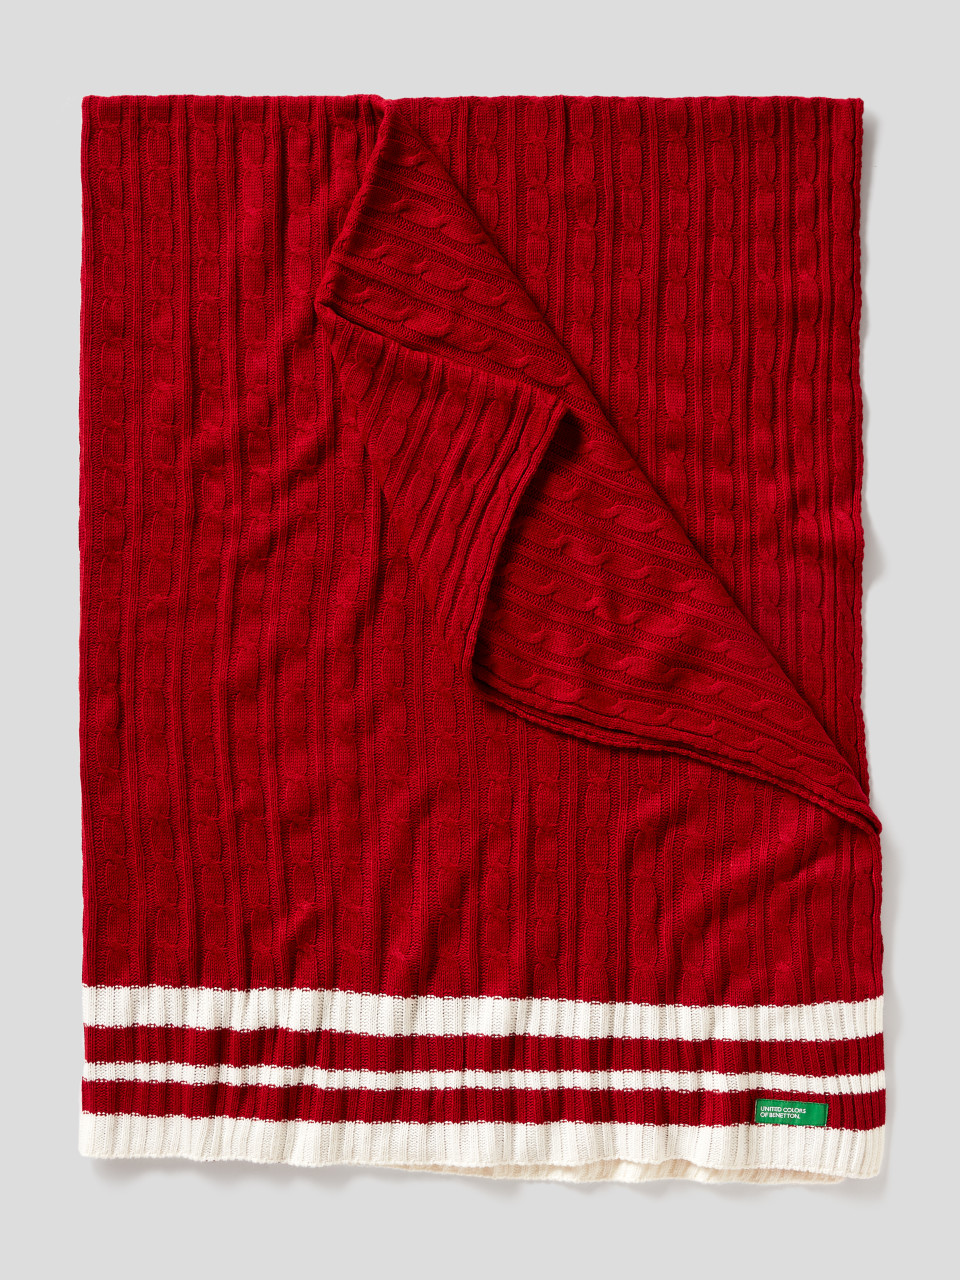 Benetton, Cable Knit Cover, Red, Benetton Home